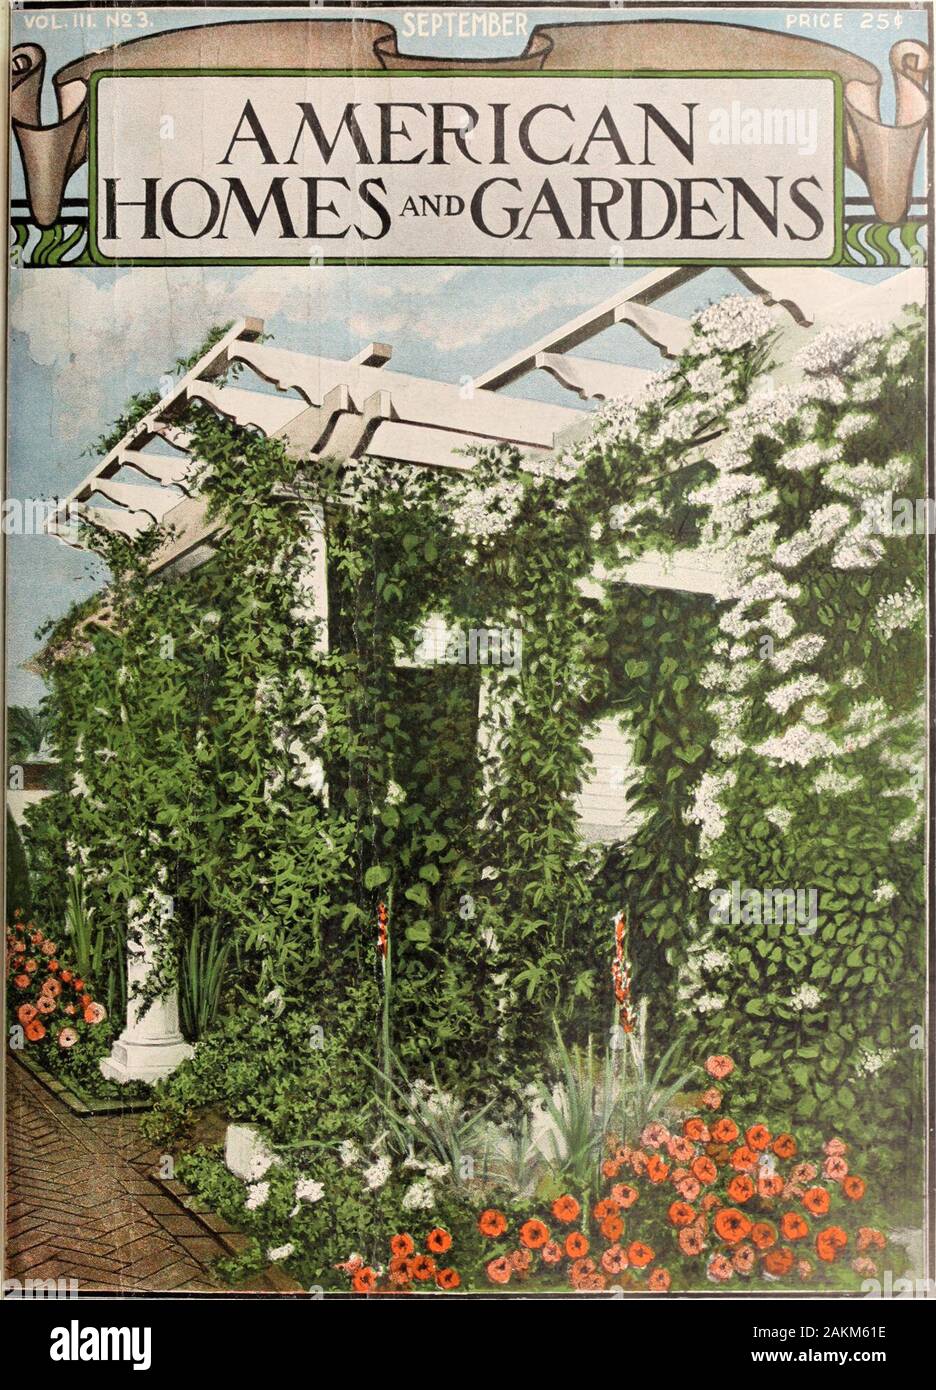 American homes and gardens . LA. Automobile Co.. Ltd. NEW HAVEN, CONN. Holcomb Ci... 1.,., Goffe Street. PEEKSKILL, N. Y. William Lawson. PHILADELPHIA, PA. Locomobile Co., 249 N. Broad Street. PROVIDENCE, R. I. Davis Automobile Co., Inc., Dorrance Street. ROCHESTER, N. Y. Joseph J. Manderv, 170 South Avenue. ST. LOUIS, MO. Capen Motor Car Co. 4743 McPherson Avenue. ST. JOSEPH, MO. Wyeth Automobile Co.SAN FRANCISCO, CAL. Loco. Agency, 1807 Hough St. (temporary). SYRACUSE, N. Y. Ames-Pierce Automobile Co., 109 South State St. SPRINGFIELD, MASS. Springfield Auto Co., Rear of Cooley House. WASHING Stock Photo